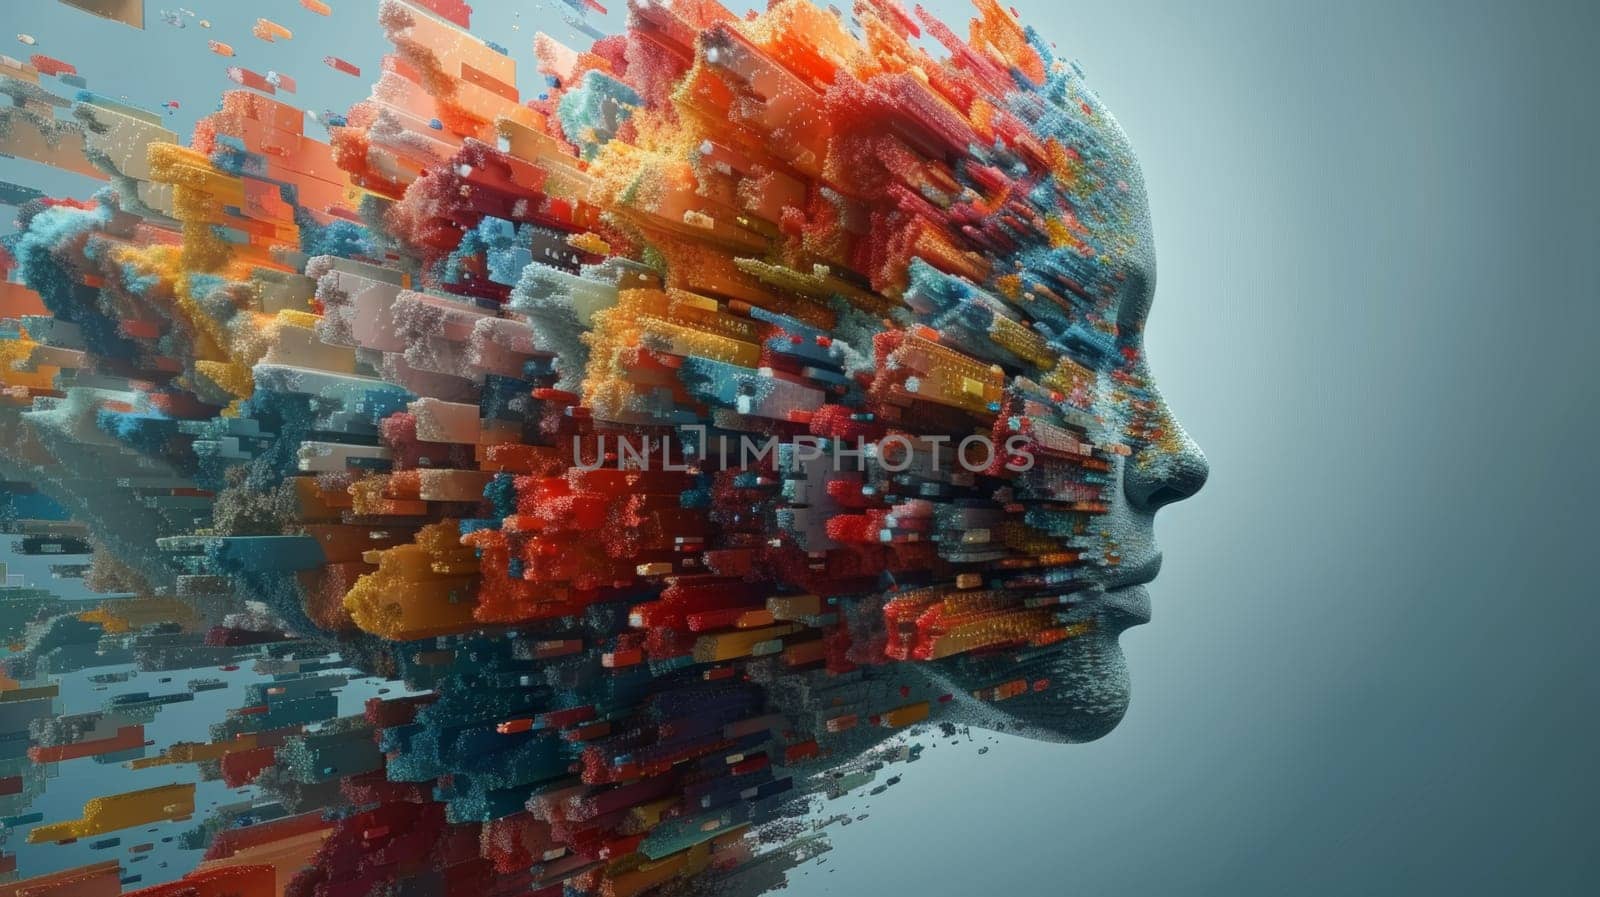 A digital image of a woman's head with many different colors